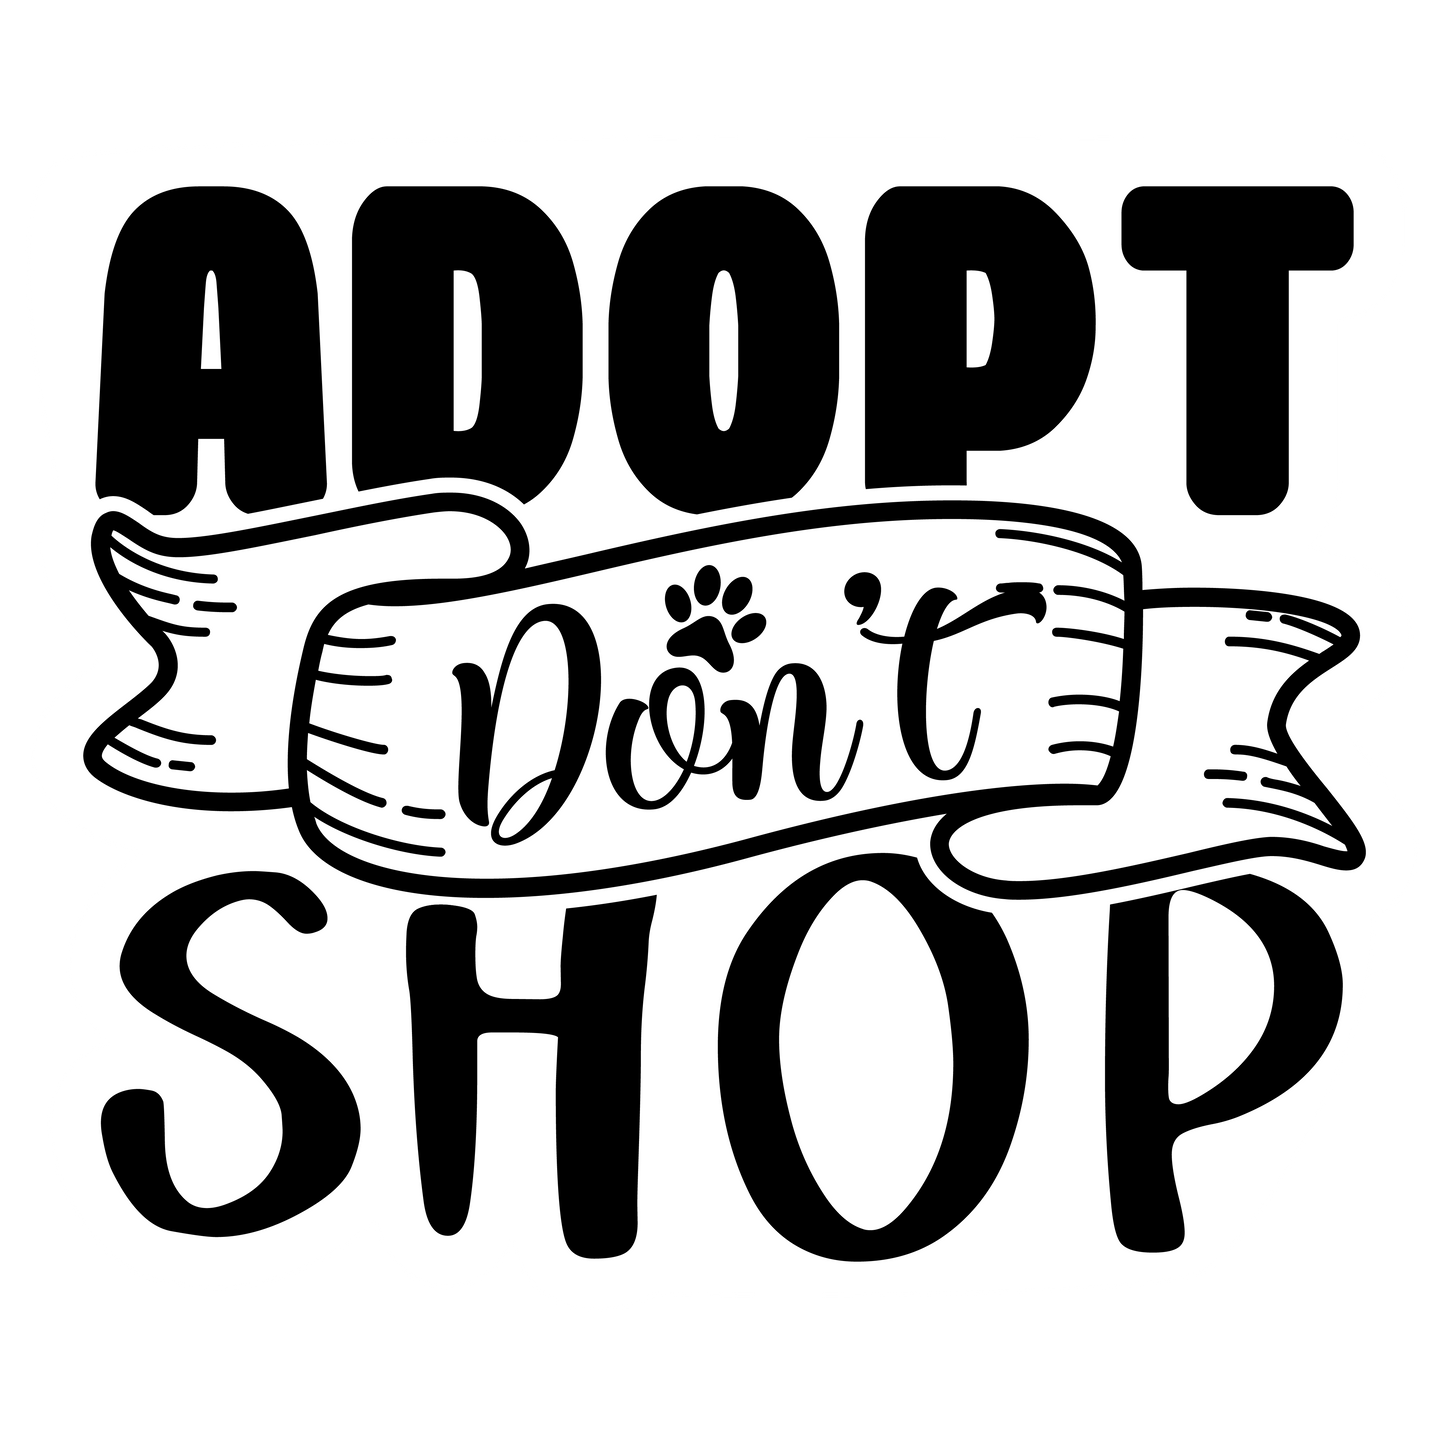 Stickers - Adopt Don't Shop, Dog Lovers' Stickers